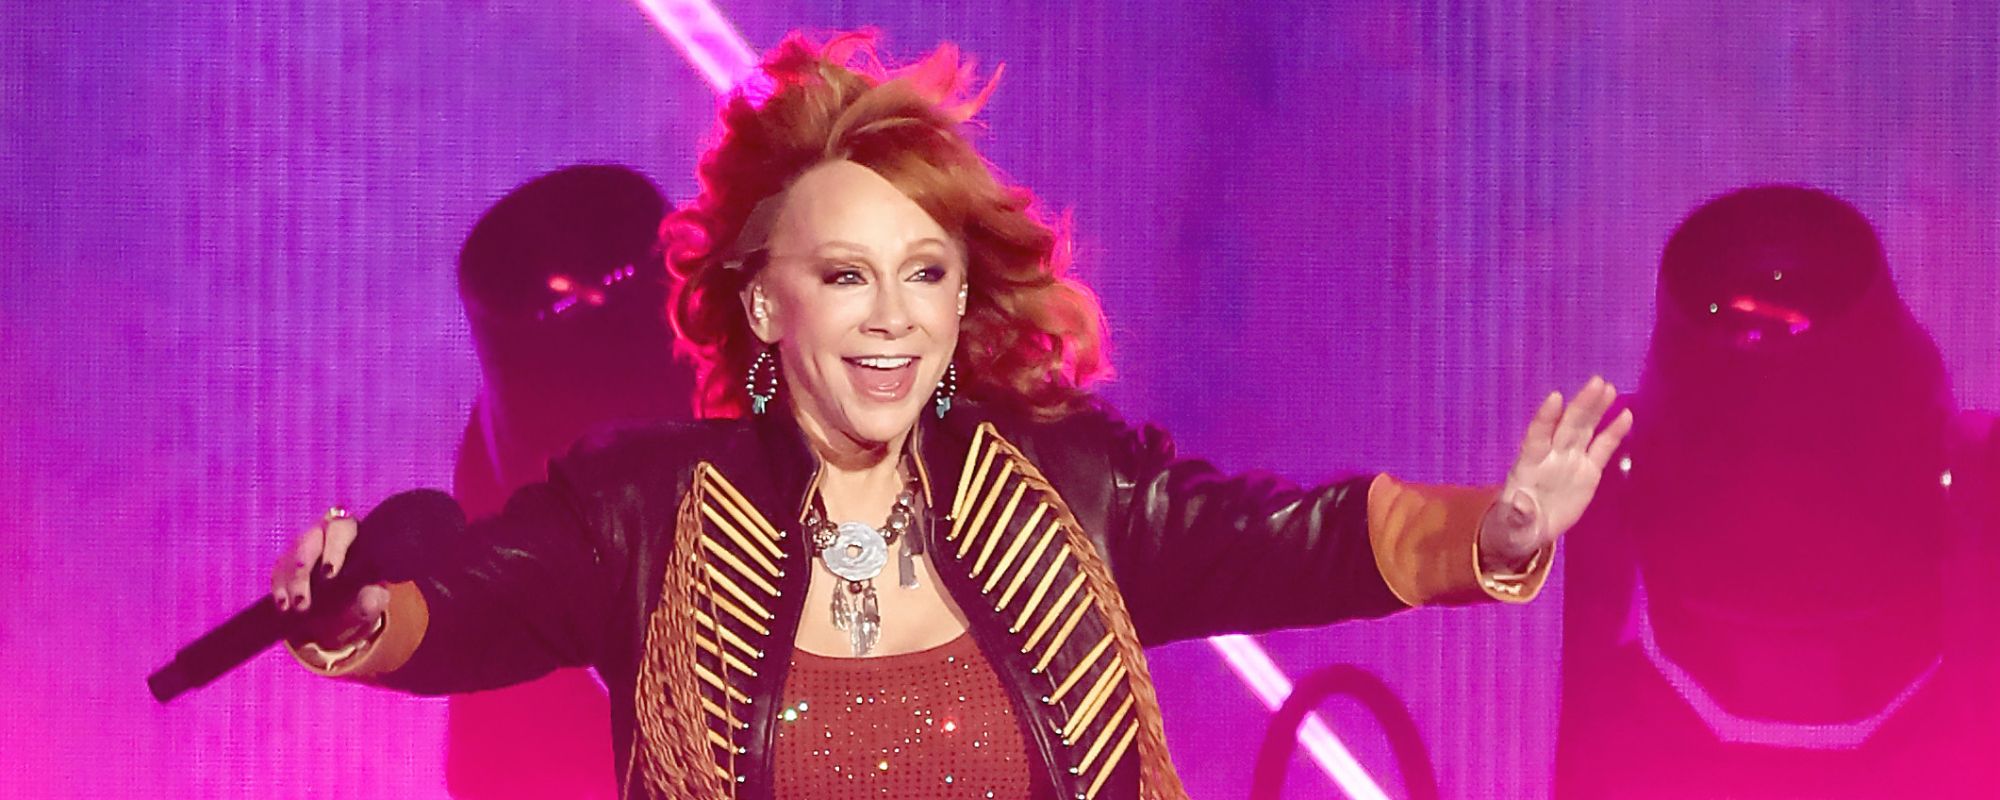 Reba McEntire Set to Premiere Brand-New Song on ‘The Voice’